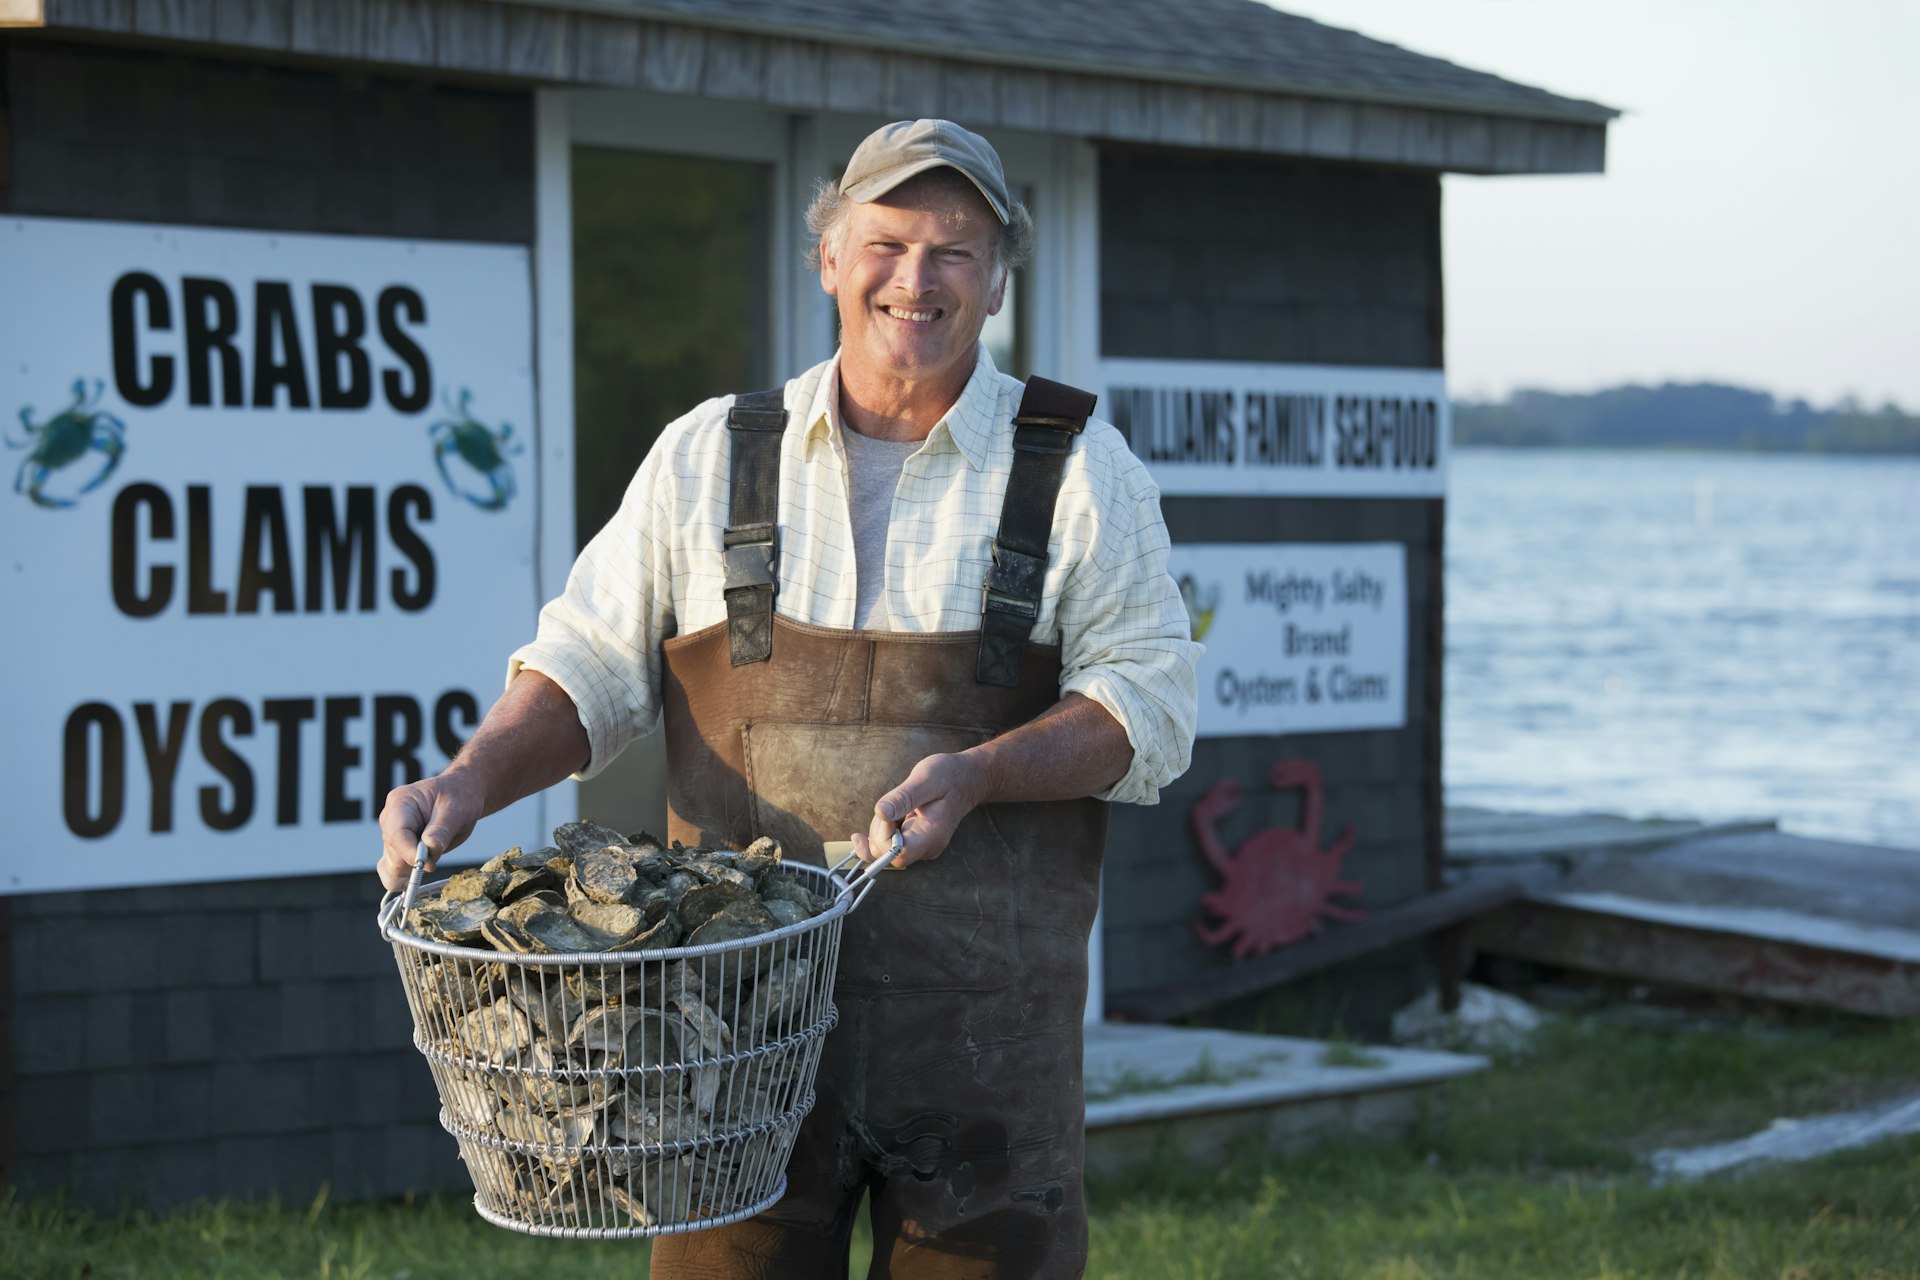 A fisherman holding a basket of oysters in the Northern Neck, Virginia, Mid-Atlantic, USA